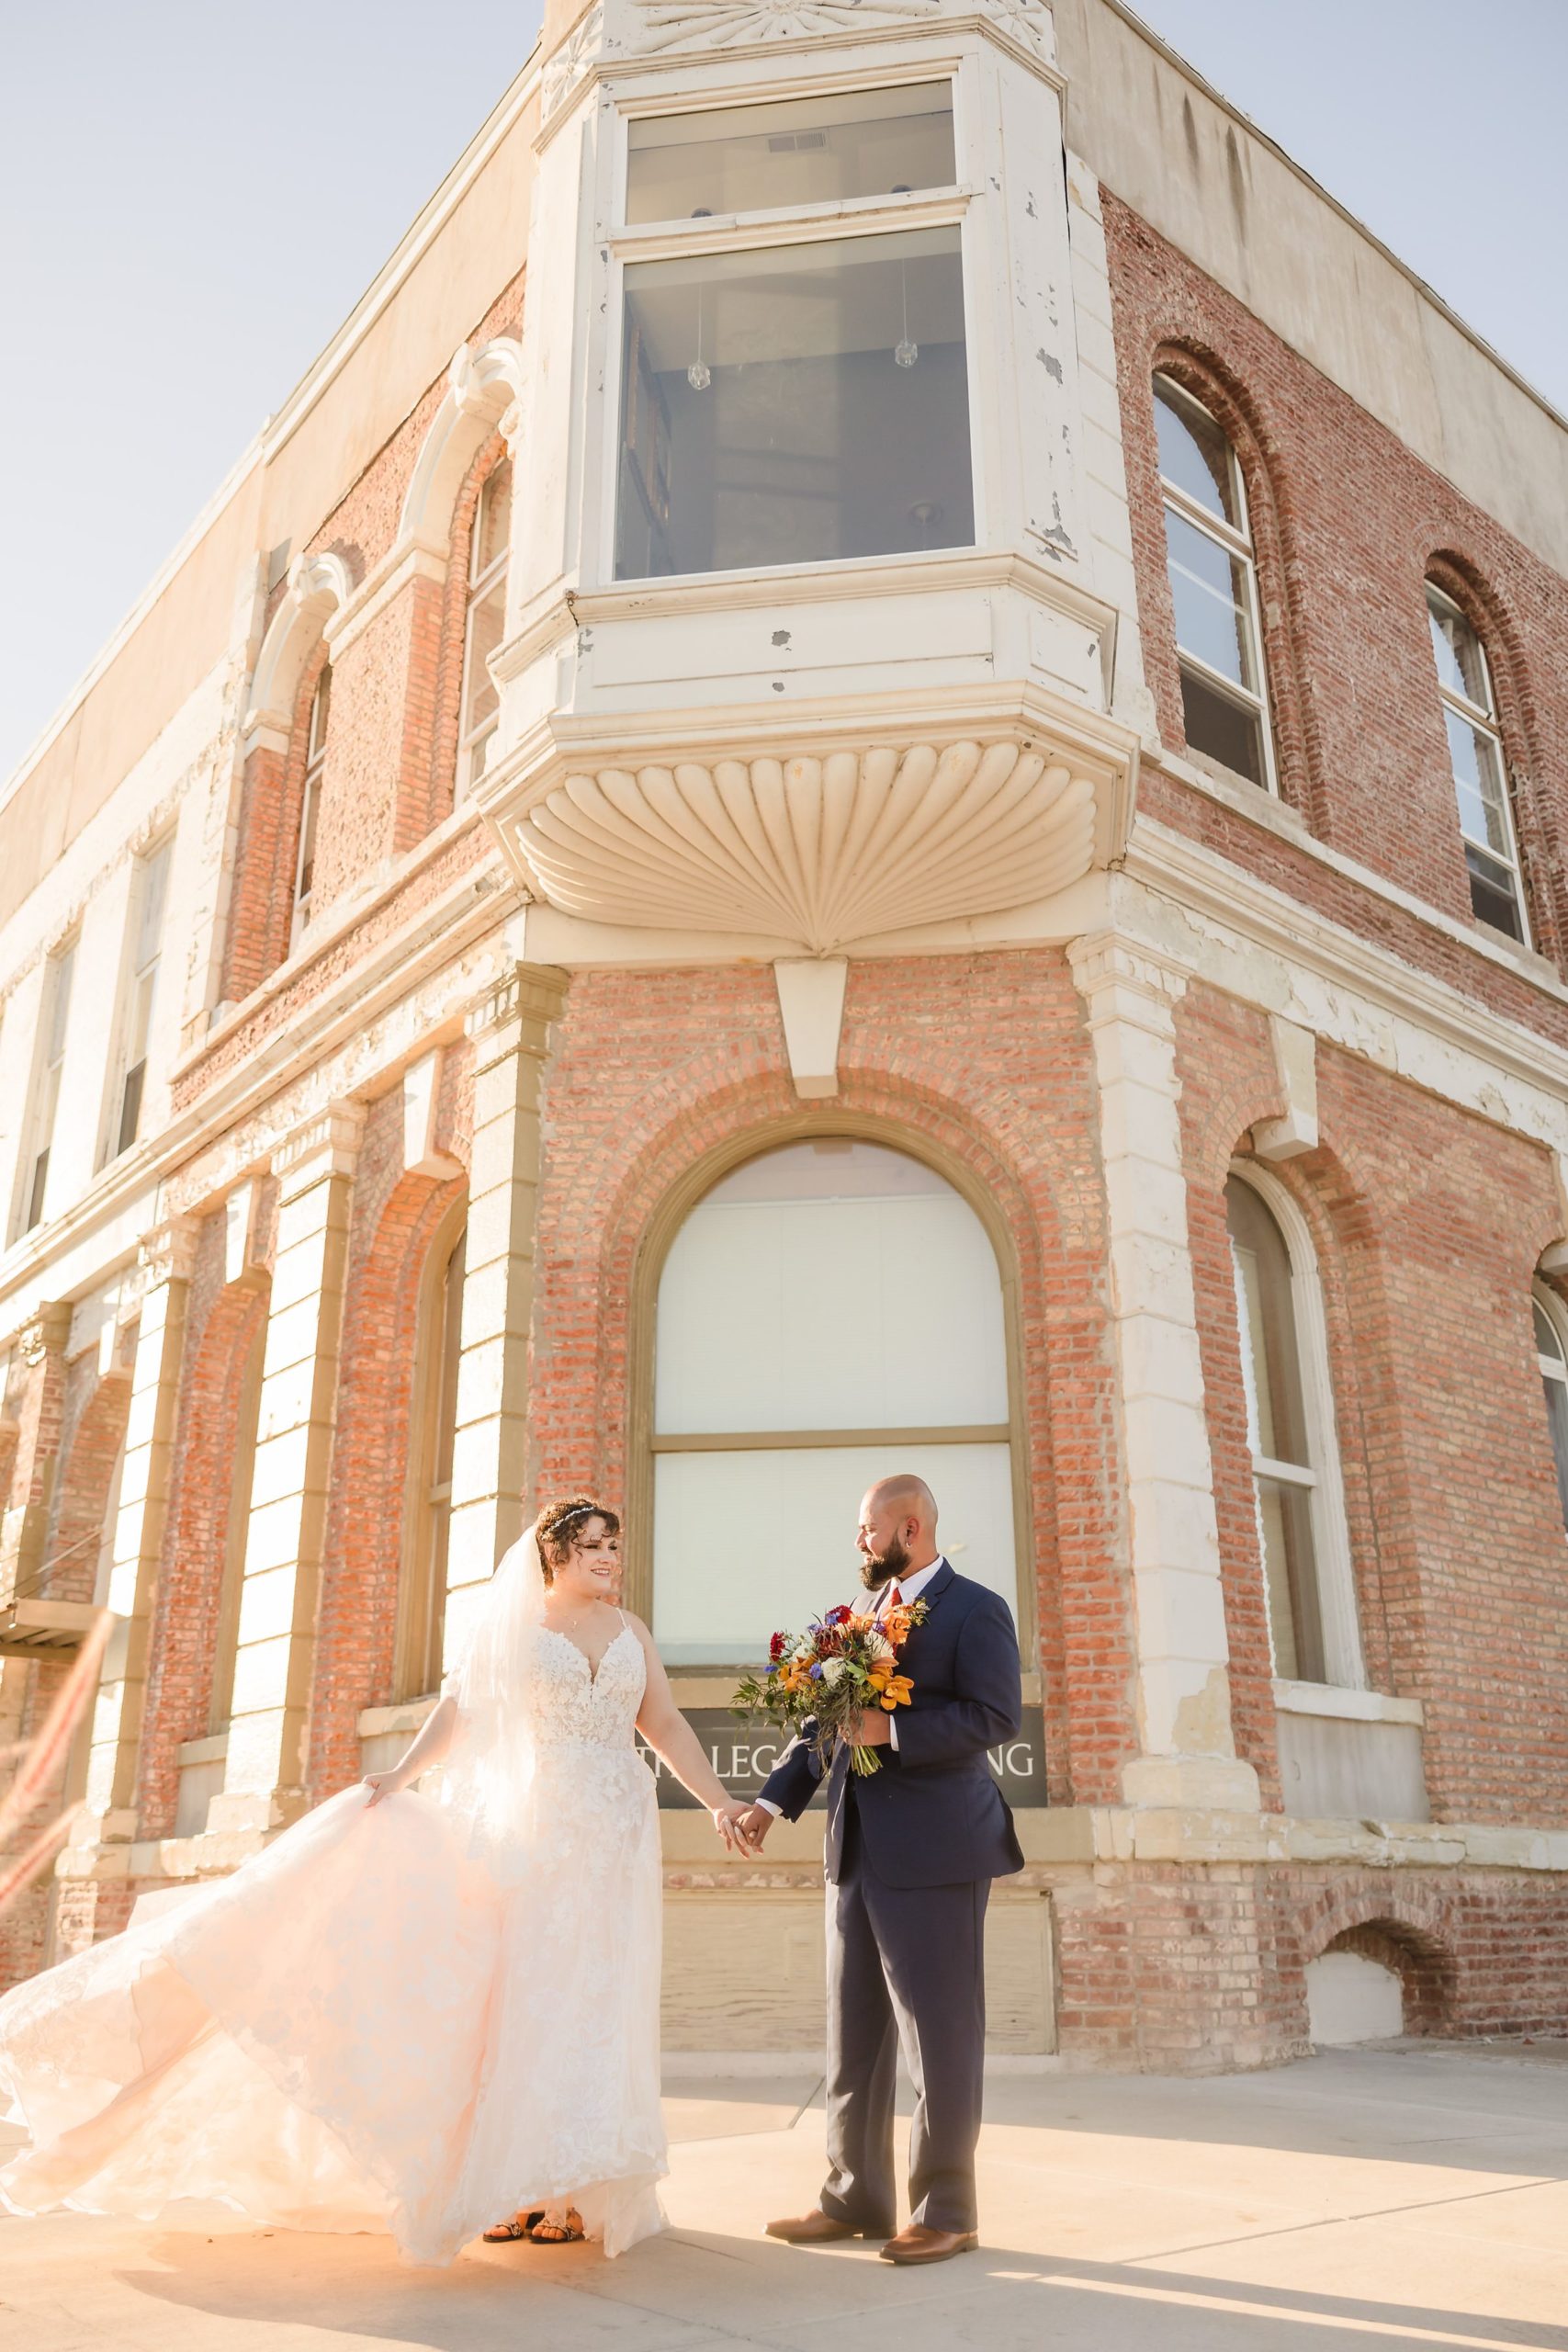 Bride and groom dance outside during their wedding at the Legacy Building in El Paso, Illinois.